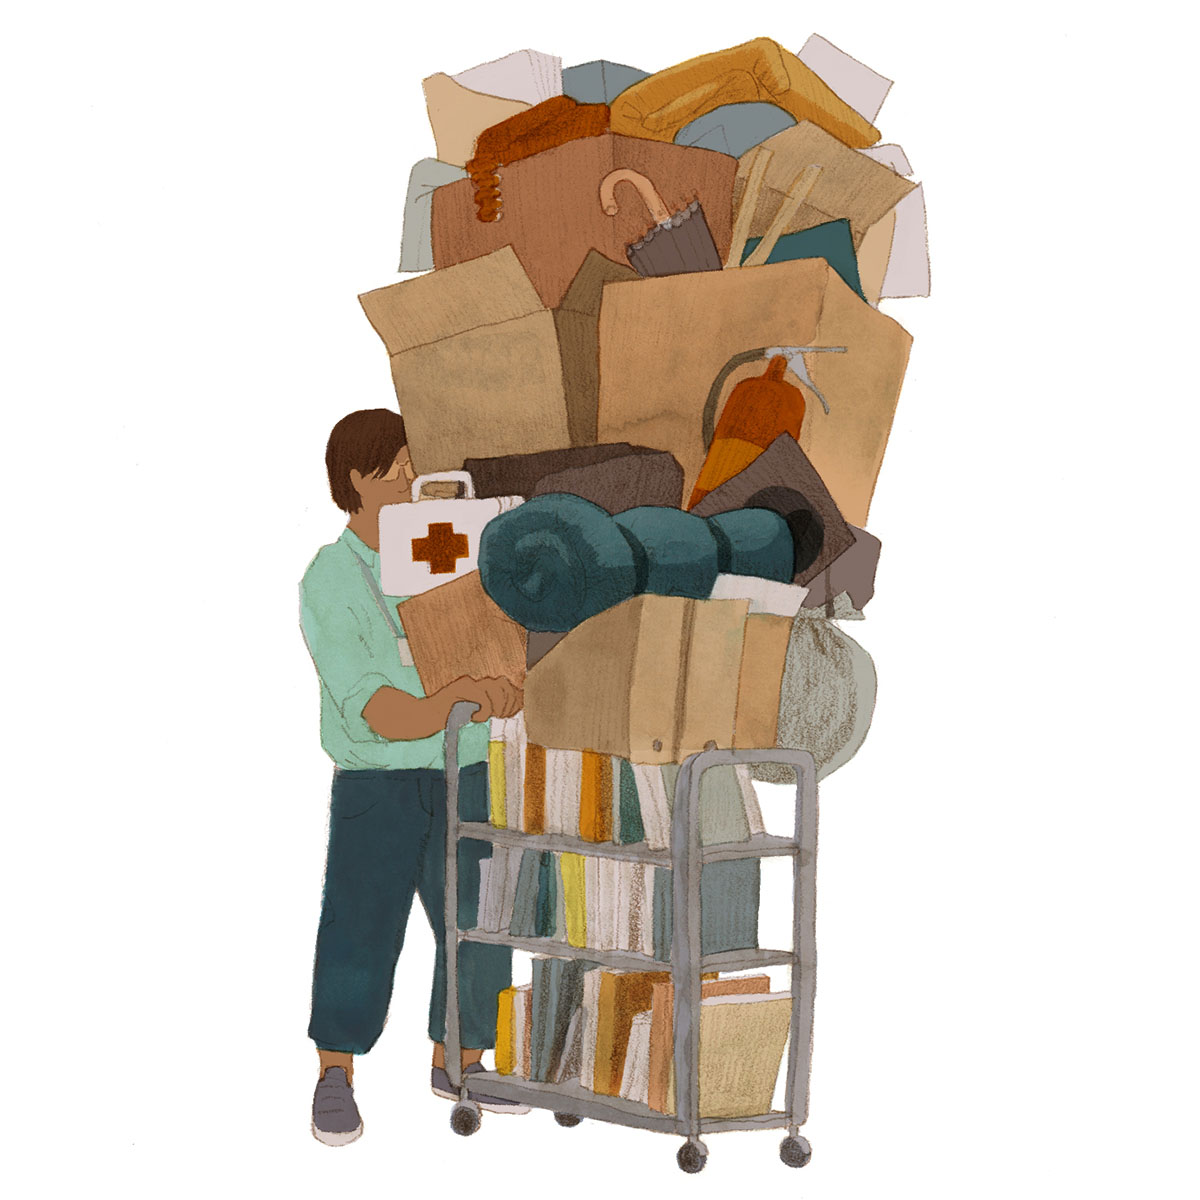 An illustration of a library worker pushing a cart filled with books and topped with a towering pile of boxes filled with miscellaneous things like a first aid kit and a sleeping bag.